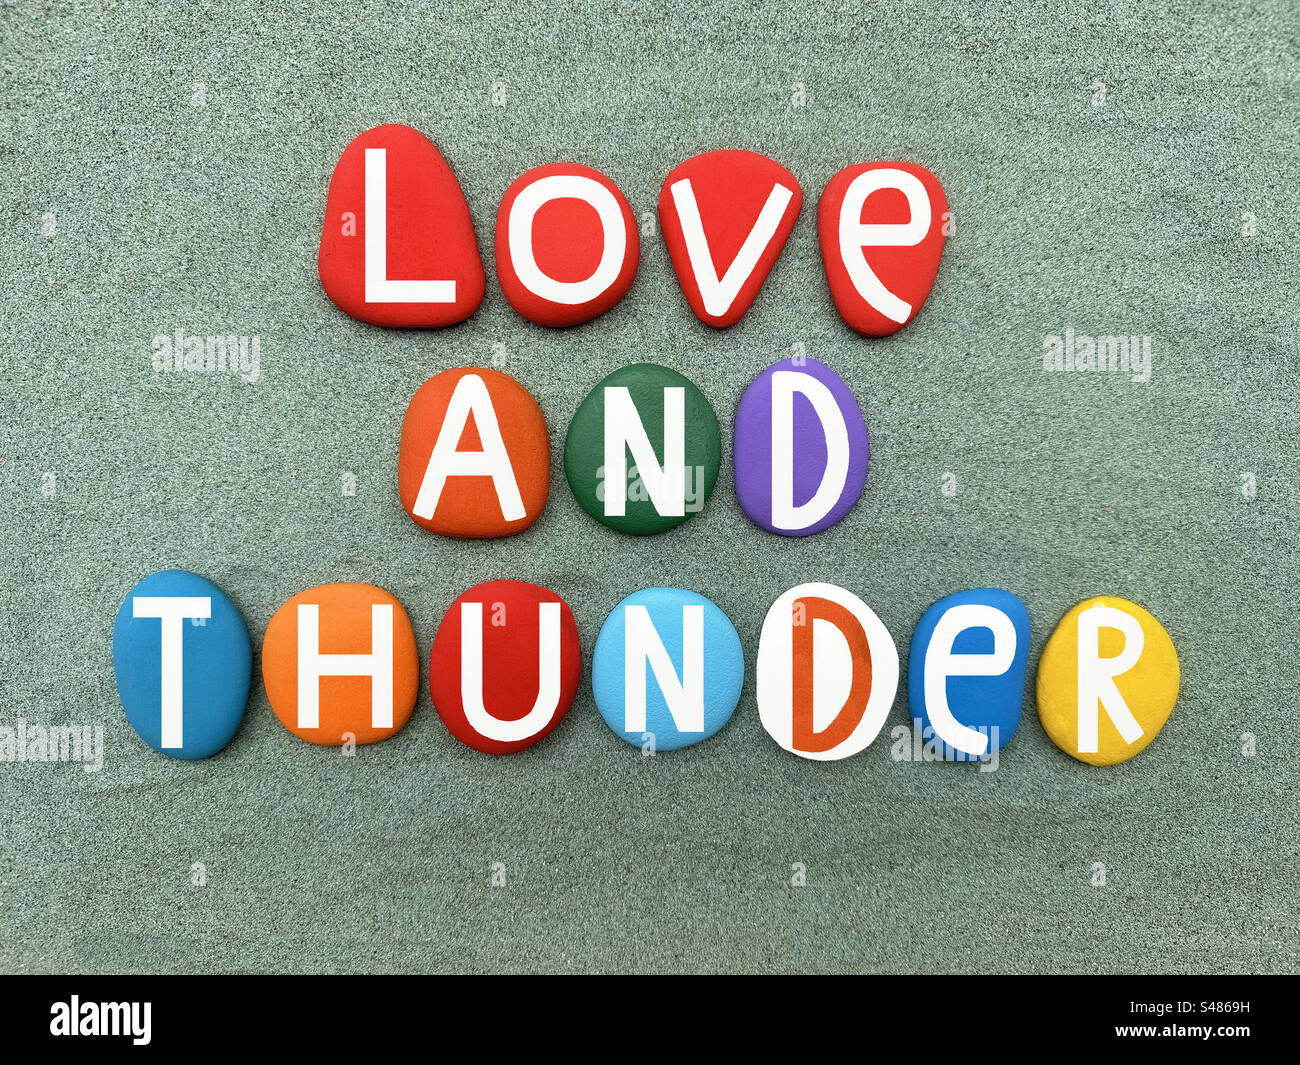 Love and thunder, creative text composed with multi colored stone letters over green sand Stock Photo